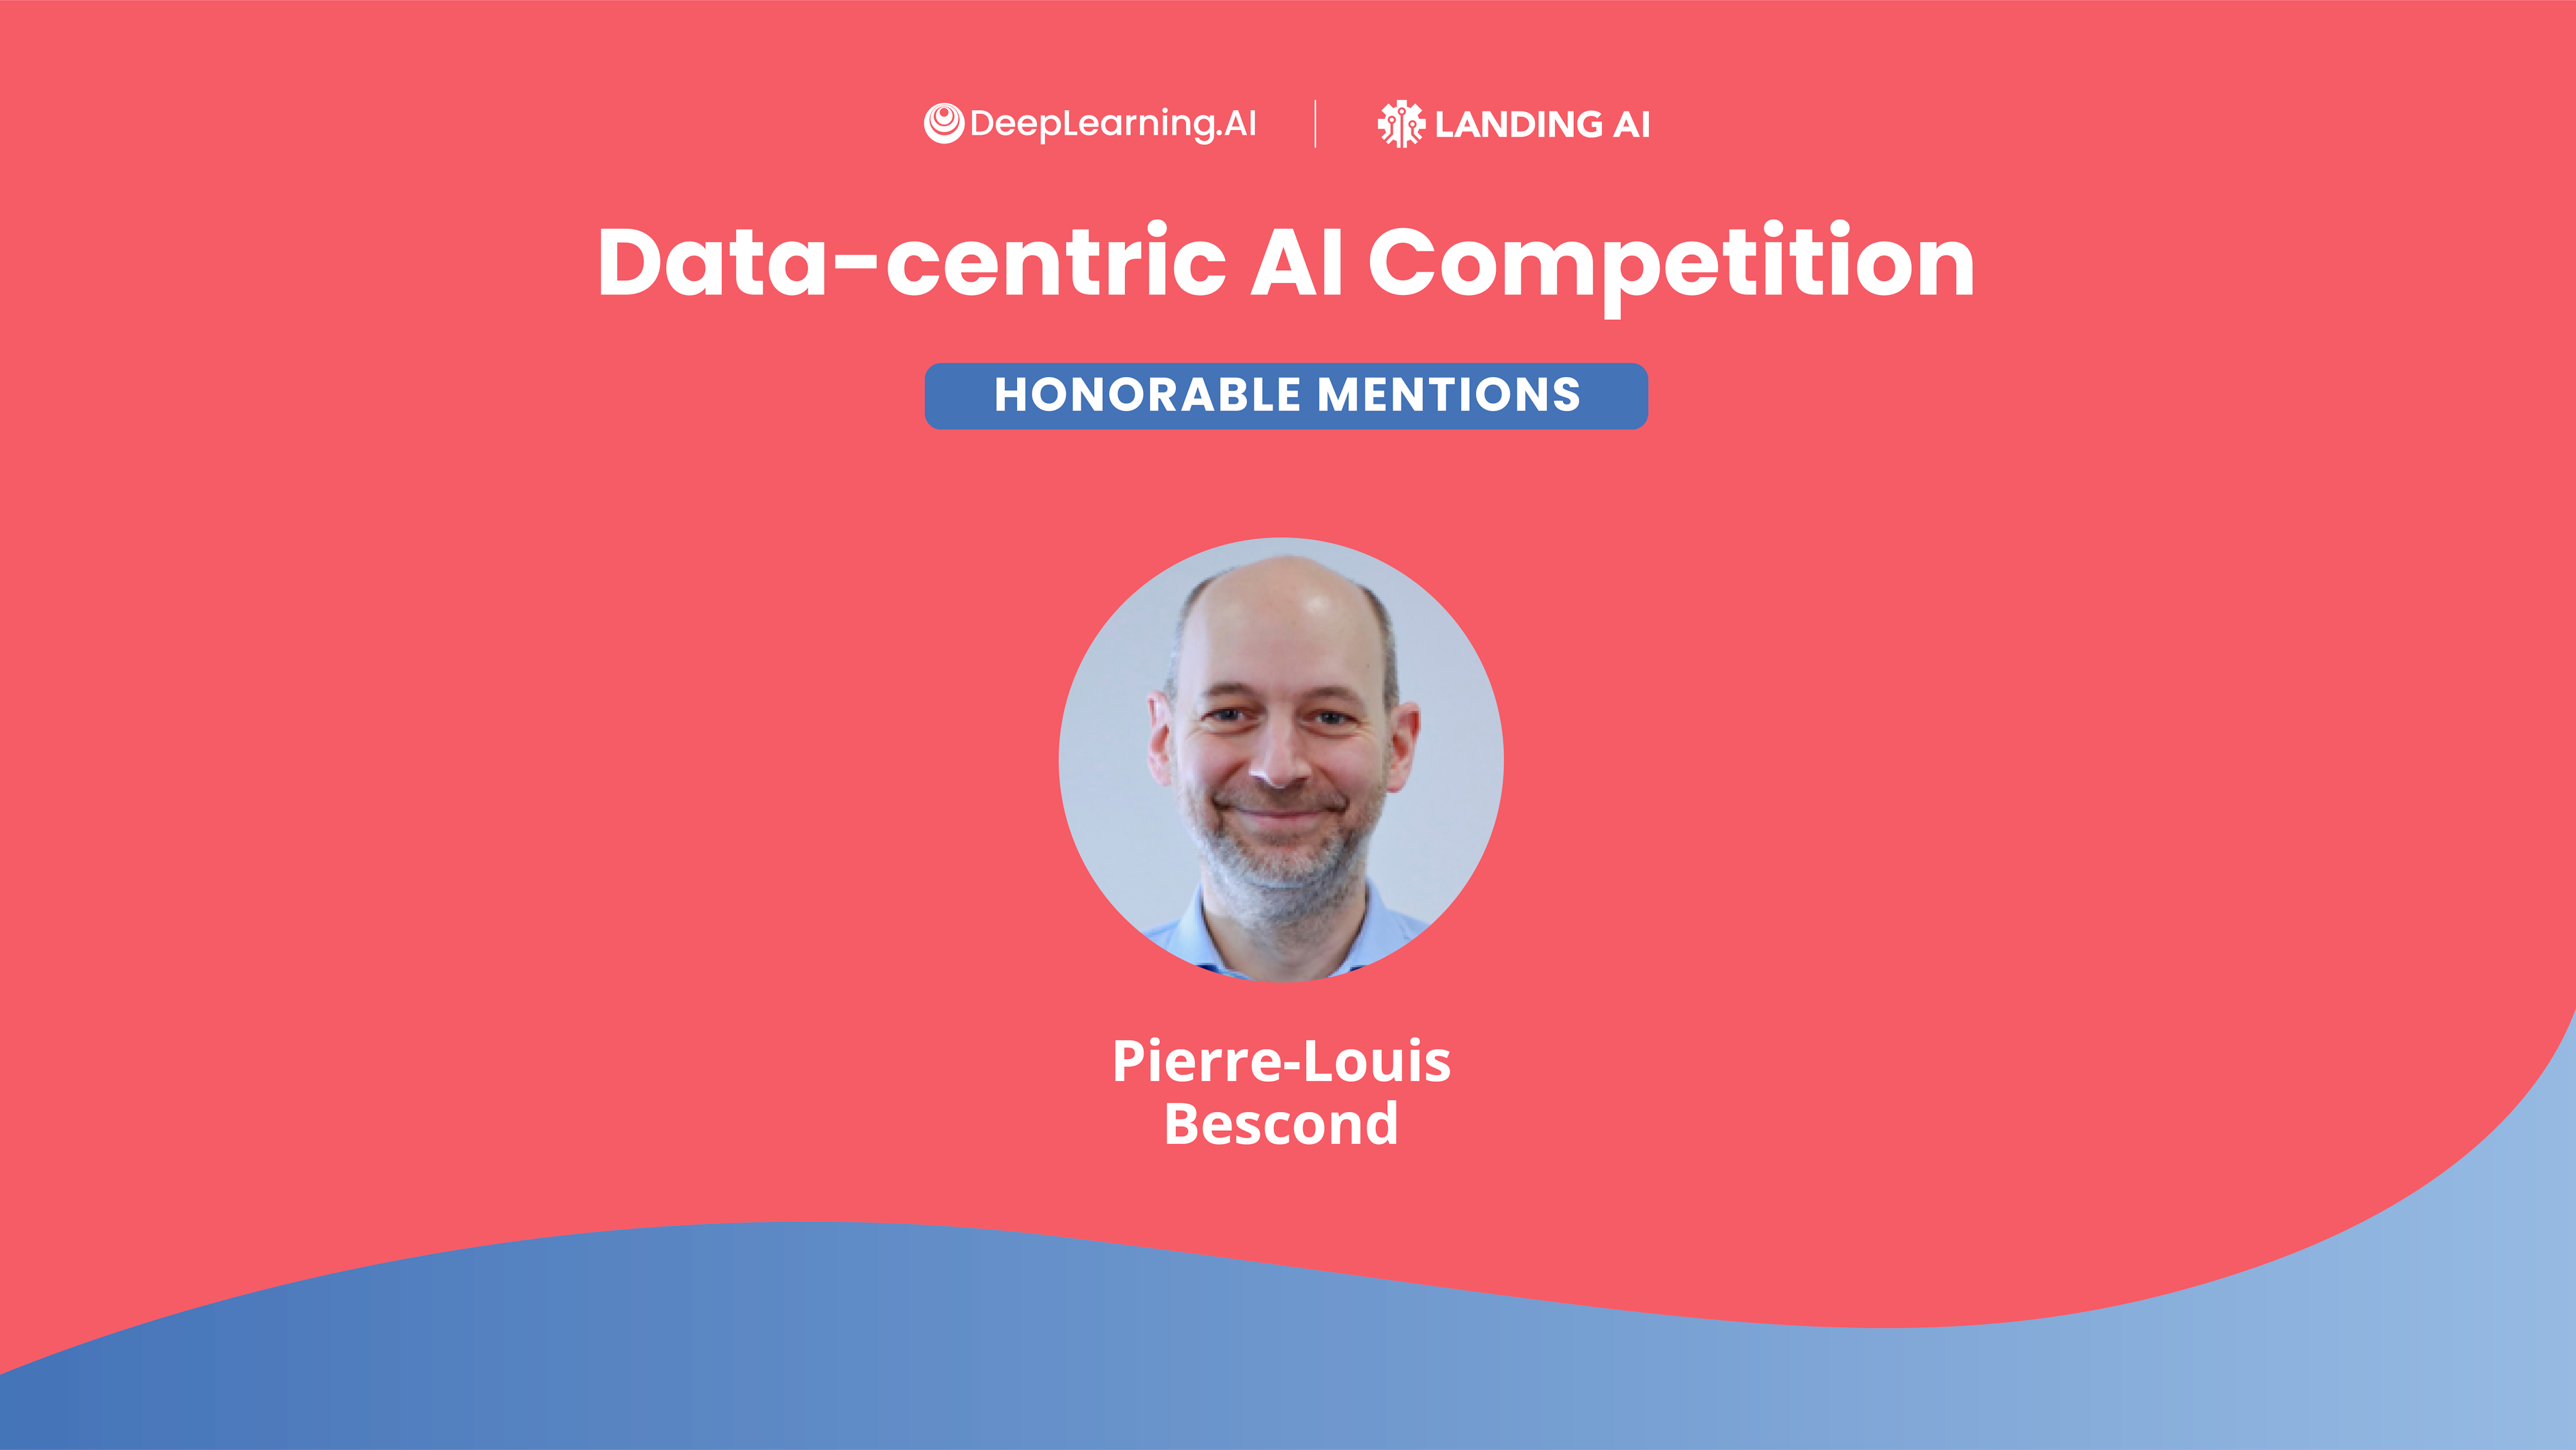 How I Won the First Data-centric AI Competition: Pierre-Louis Bescond